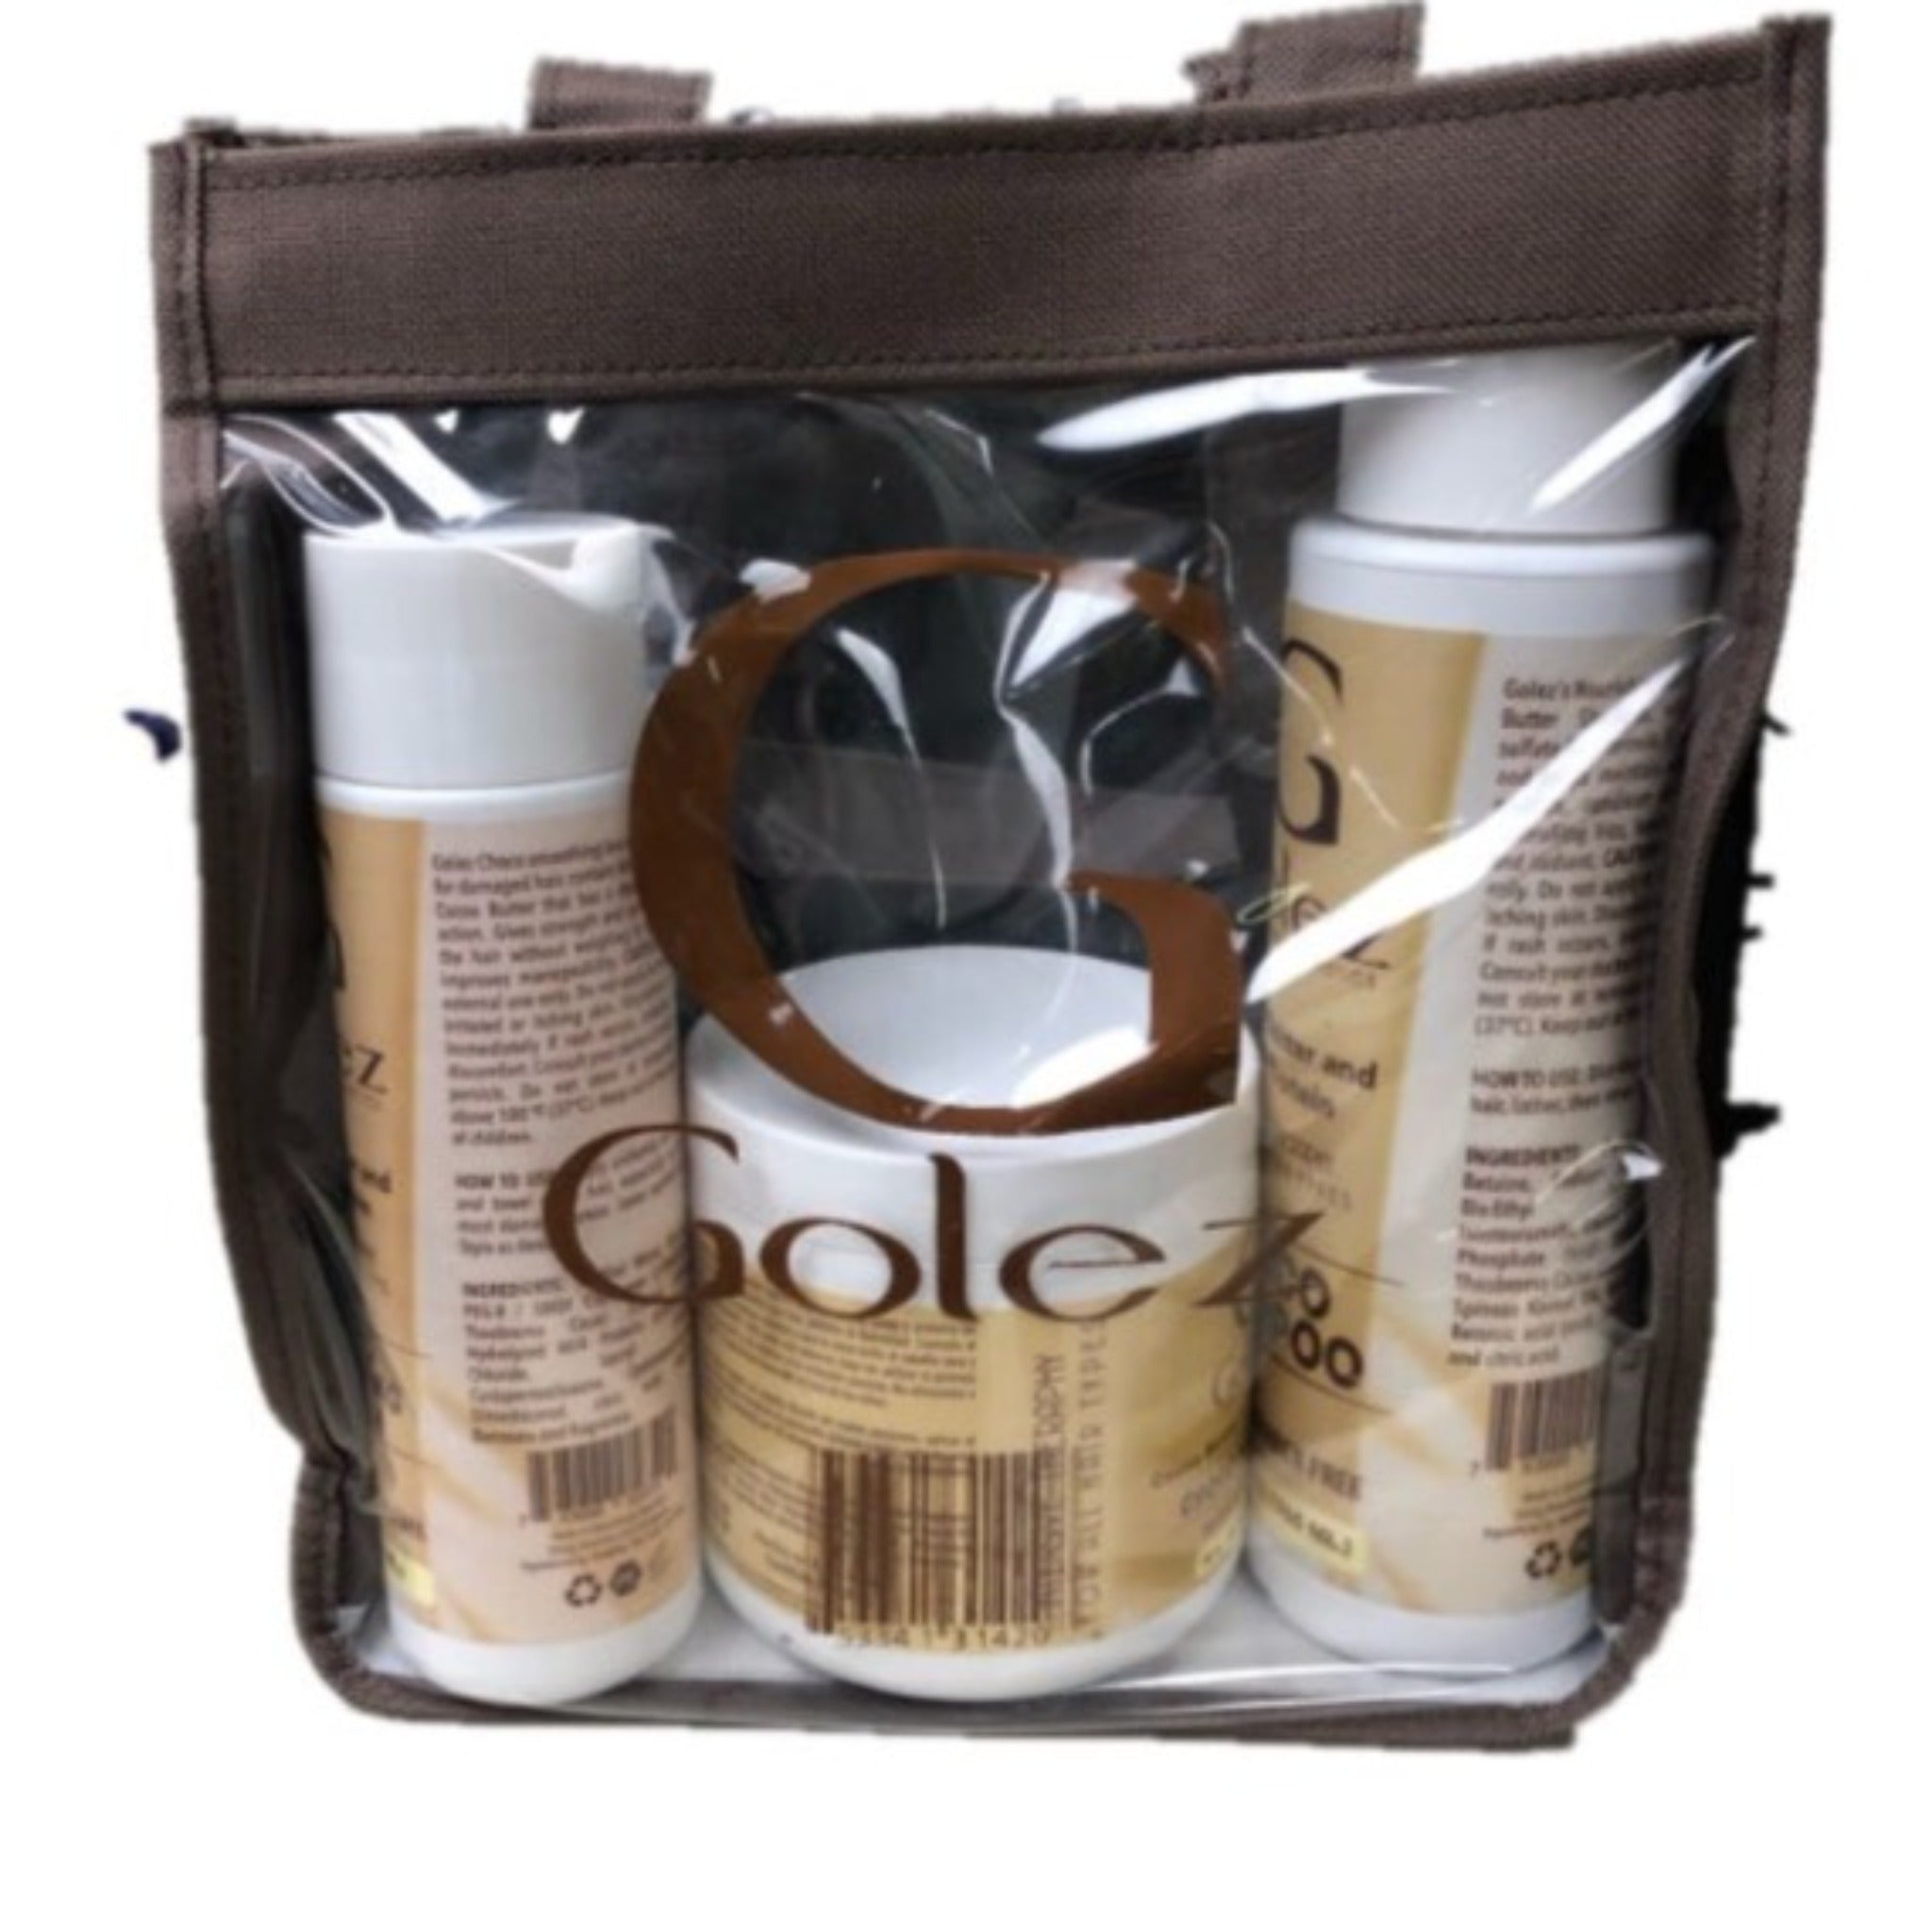 Golez Choco Mask Cocoa Butter And Milk Protein Kit (Bolso)